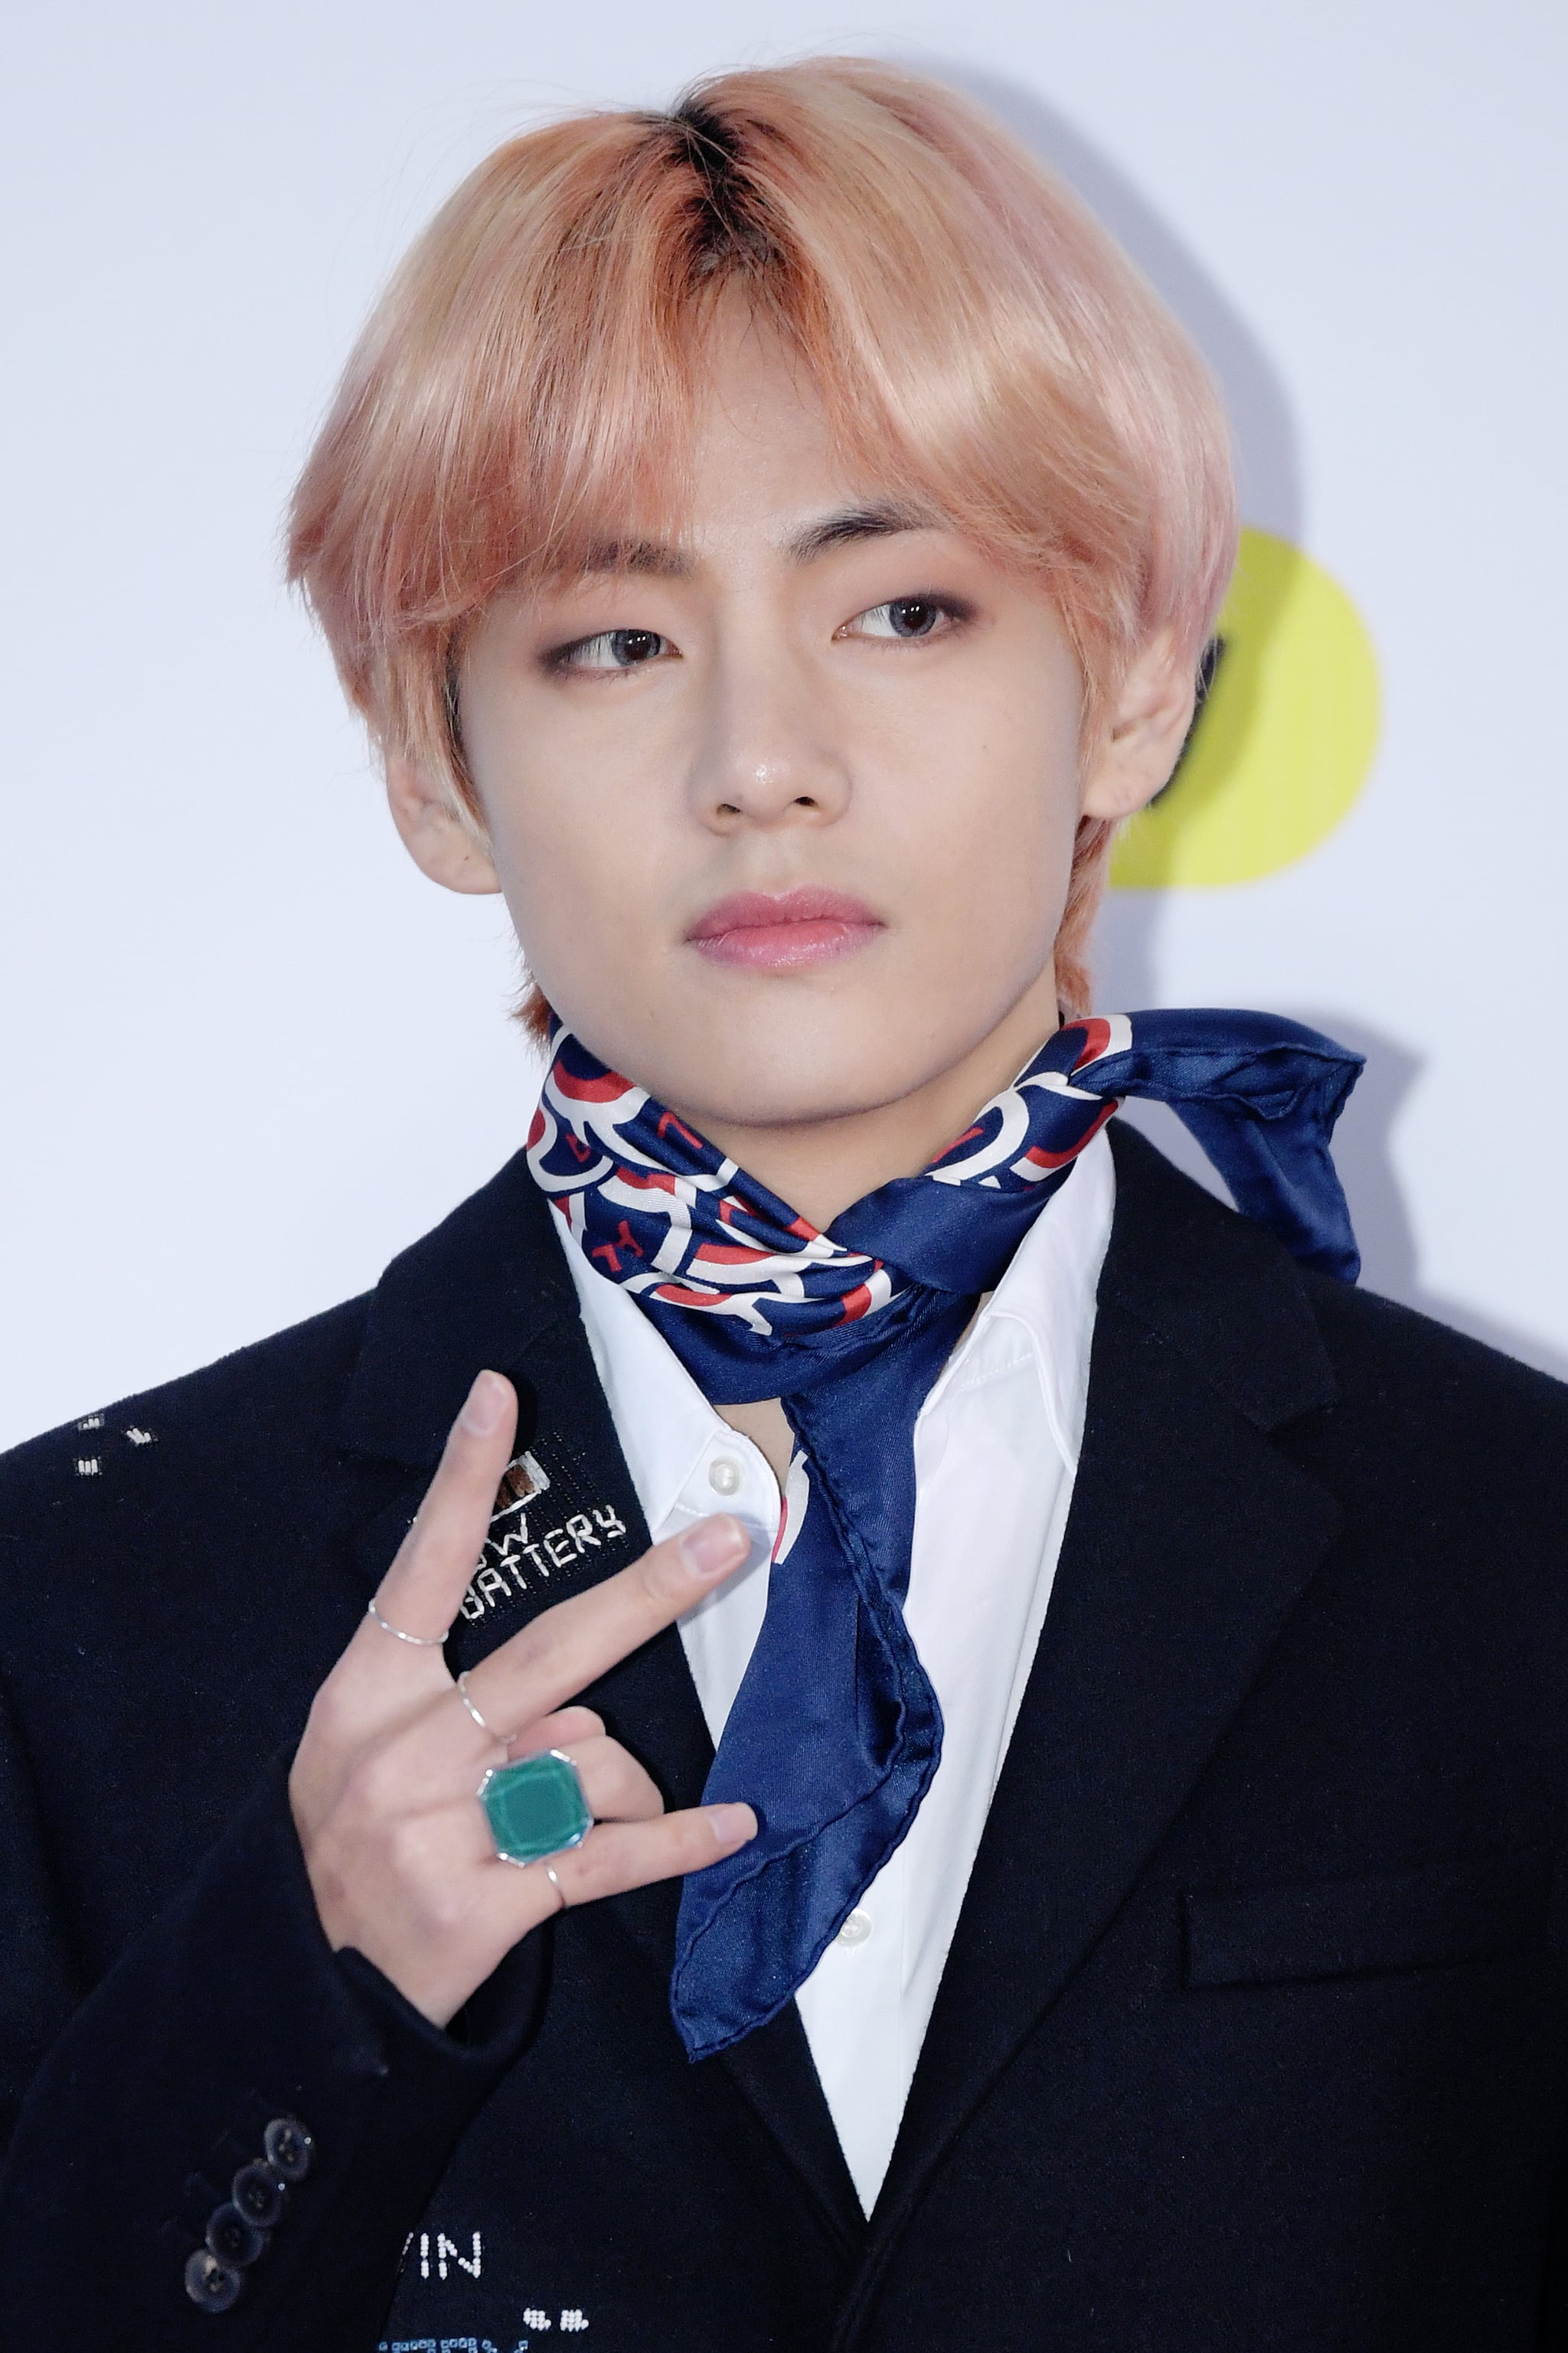 SEOUL, SOUTH KOREA - DECEMBER 25: V of BTS attends the 2018 SBS Gayo Daejeon 'Battle of the Bands' at Gocheok Sky Dome on December 25, 2018 in Seoul, South Korea. (Photo by THE FACT/Imazins via Getty Images)